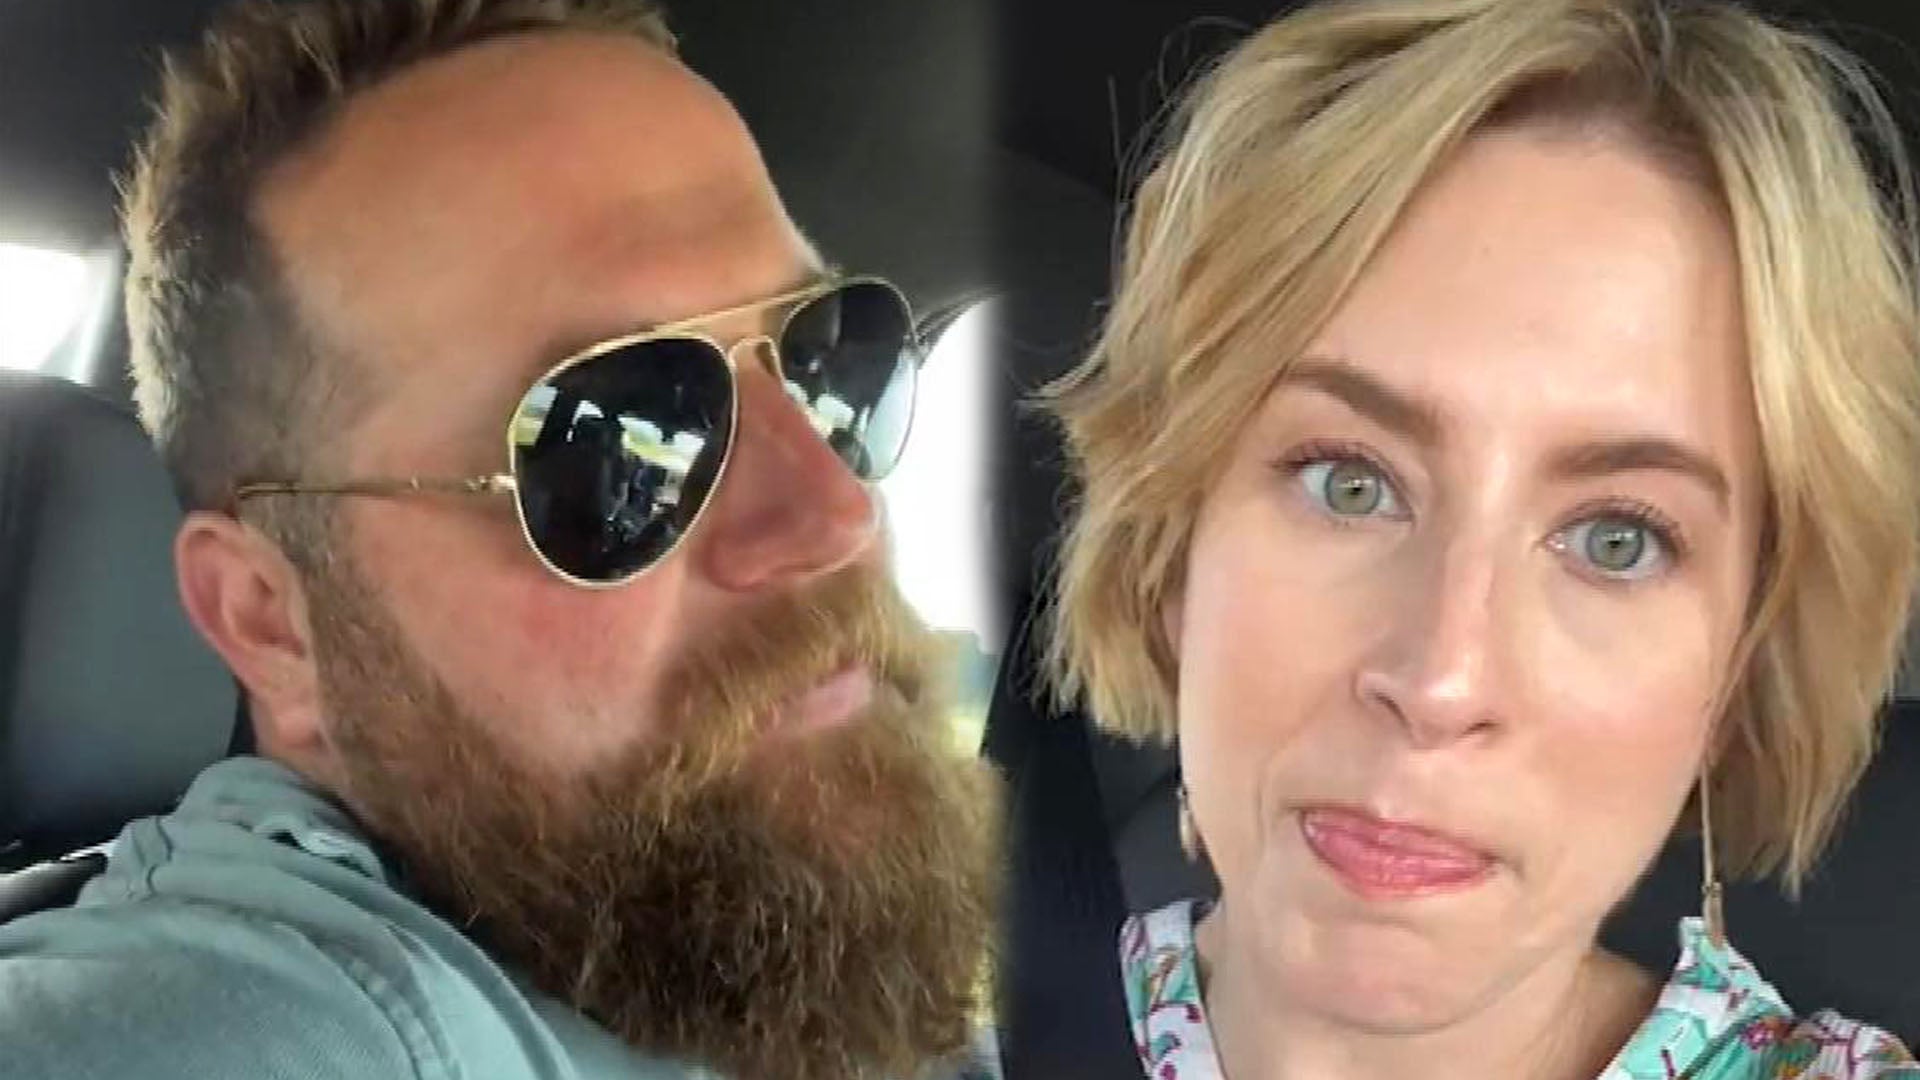 Erin and Ben Napier Clap Back at 'Nasty' Feedback From Haters About Their Home Renovations